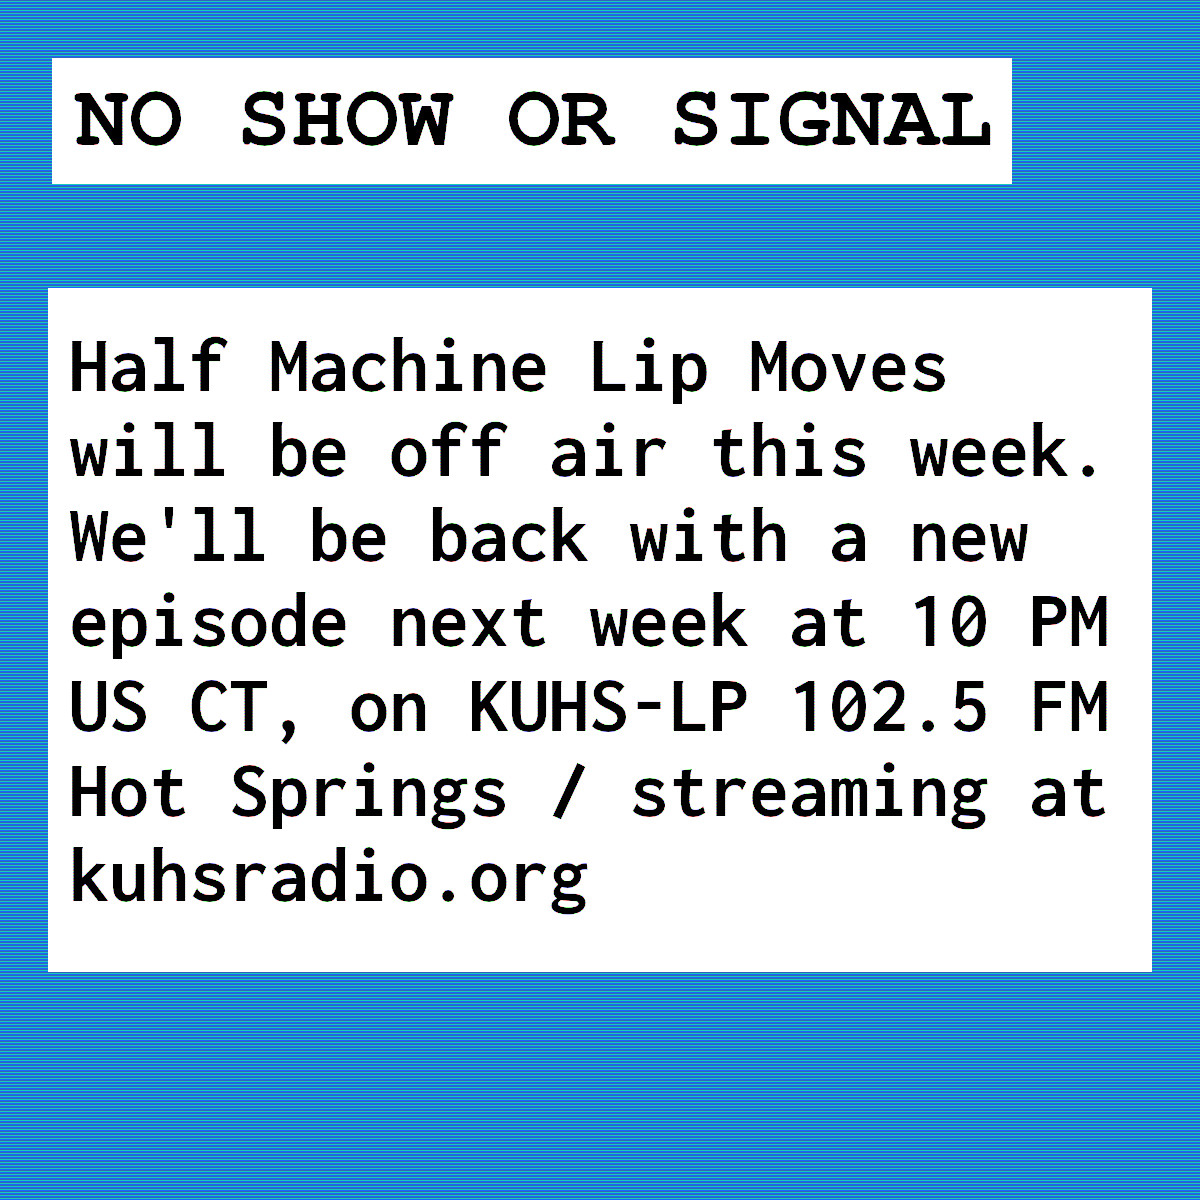 &ldquo;The image has a blue background. There is a white box with black text that says, No show or signal.&rsquo; The box below it says, &lsquo;Half Machine Lip Moves will be off air this week. We&rsquo;ll be back with a new episode next week at 10 PM US CT on KUHS-LP 102.5 FM Hot Springs and and streaming at kuhsradio.org .&rsquo;&rdquo;